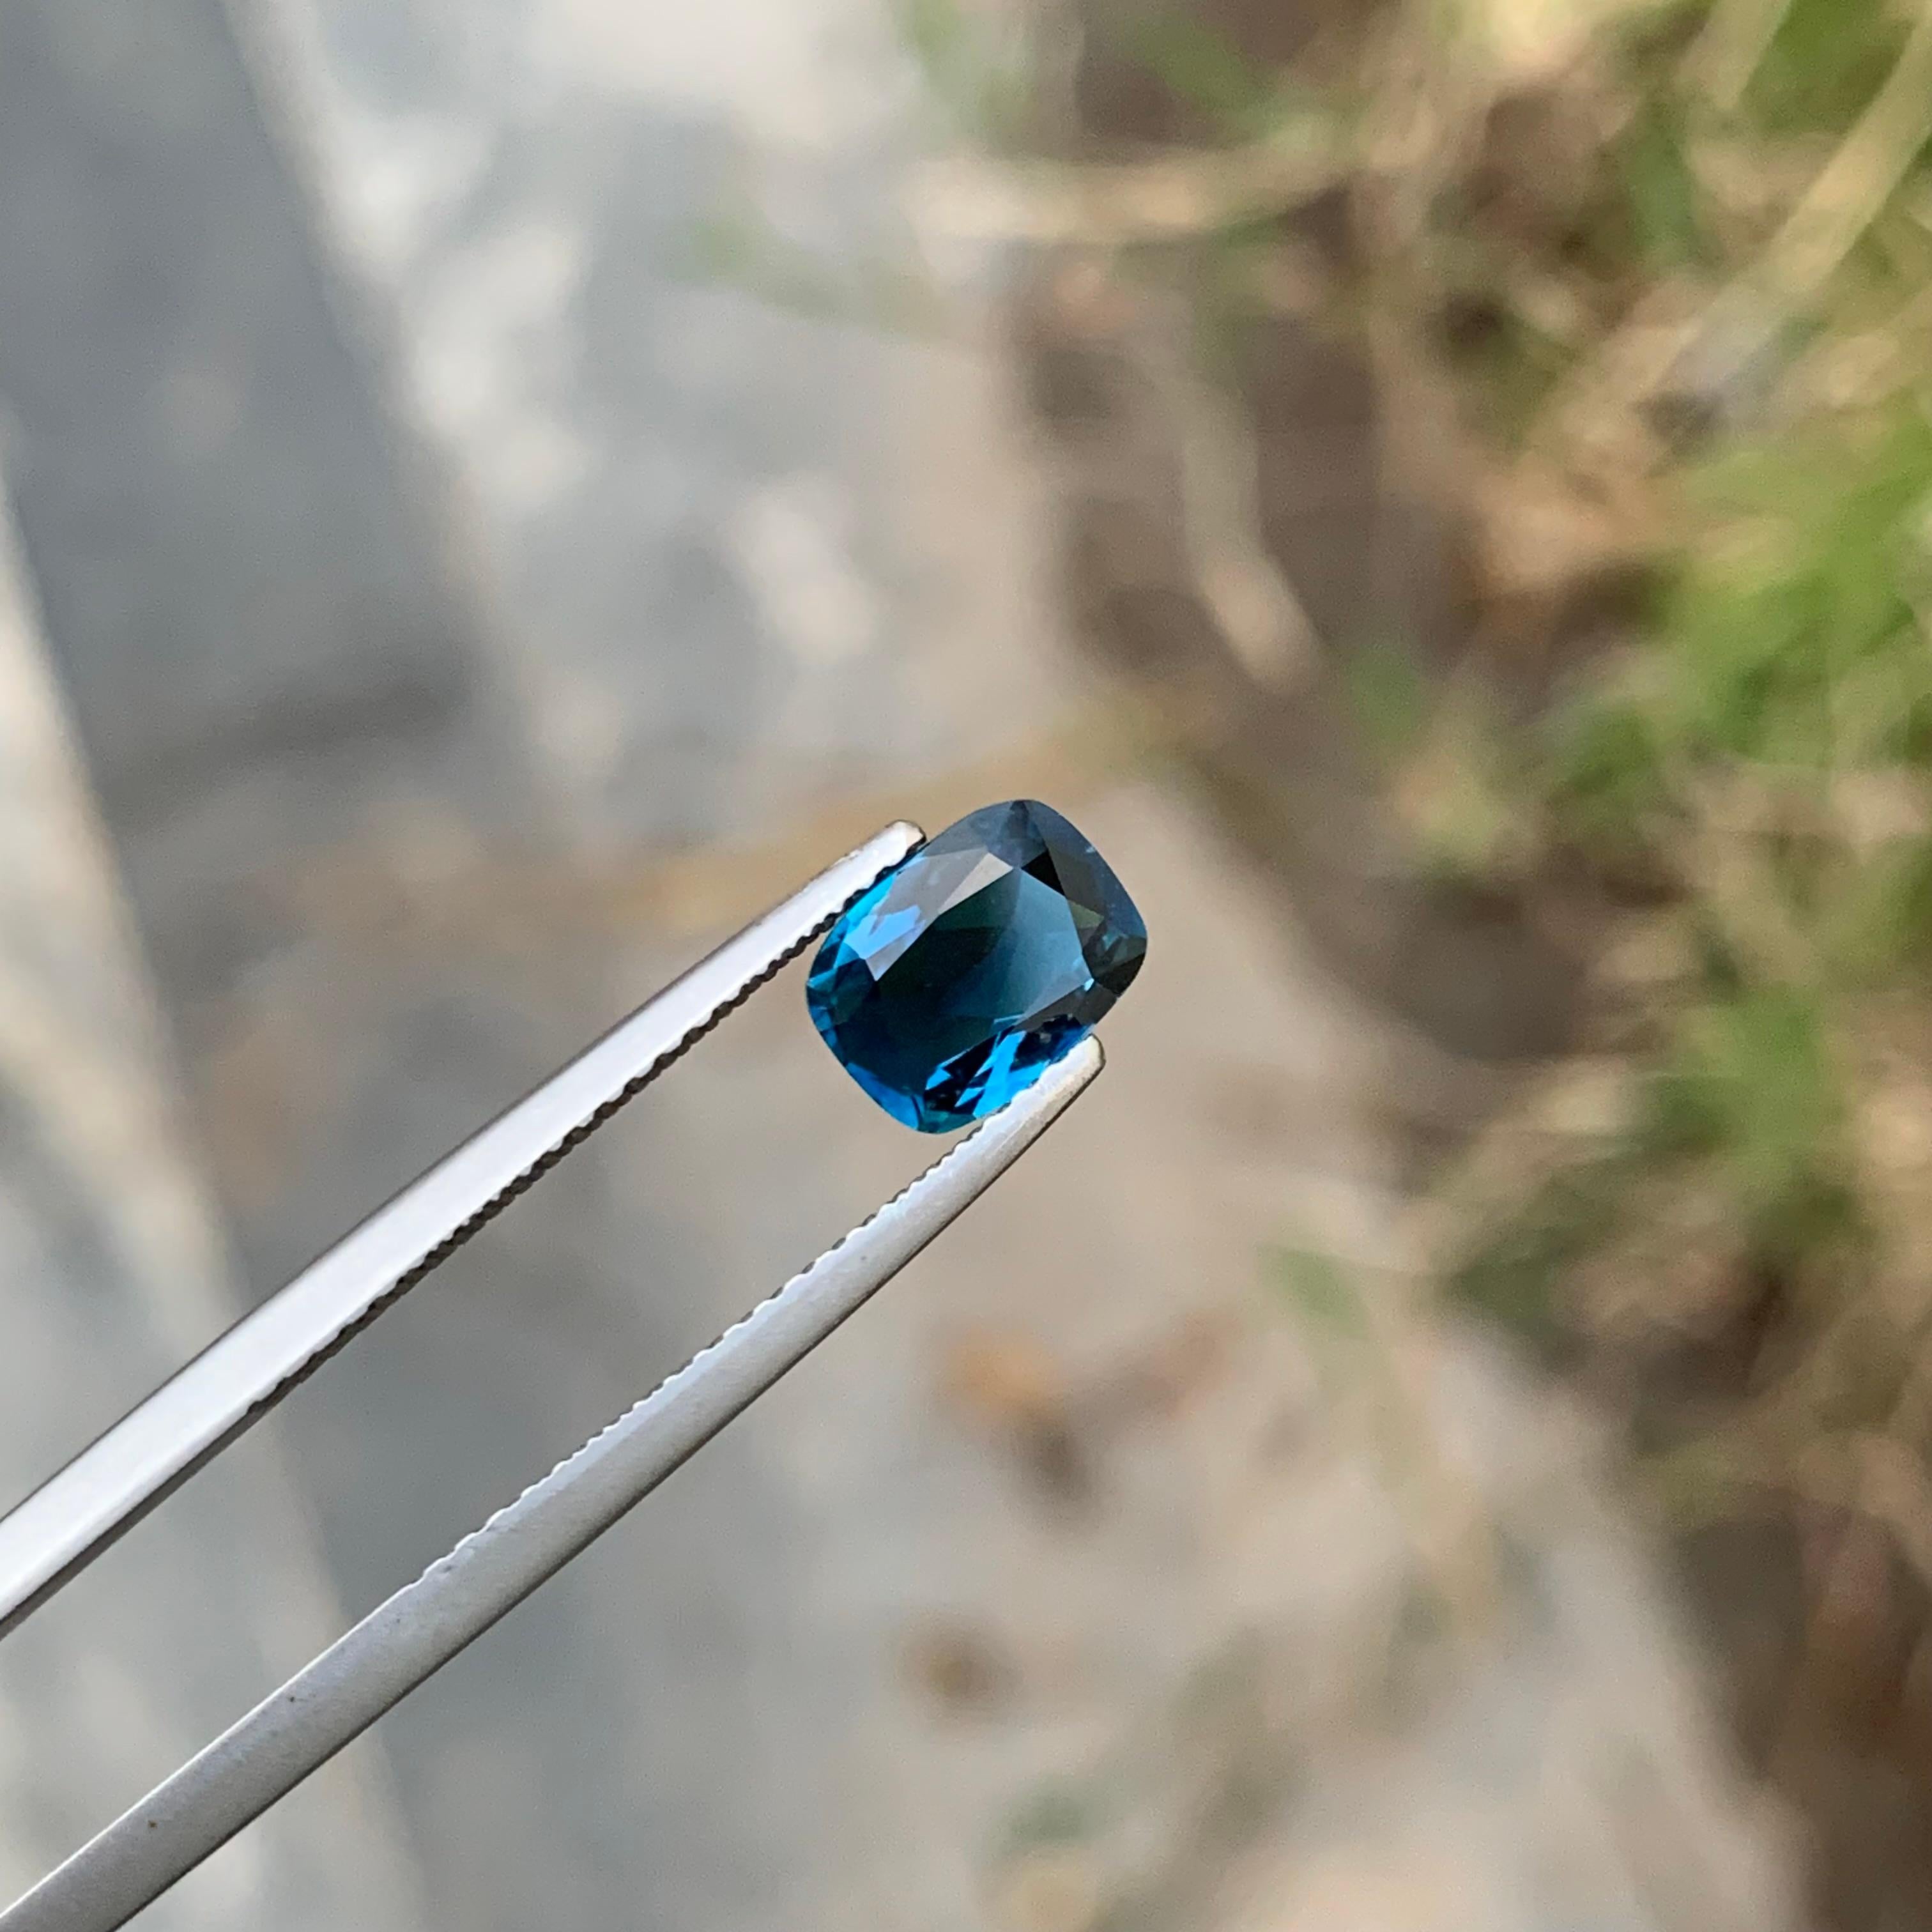 Loose Ink Blue Tourmaline

Weight: 0.90 Carats
Dimension: 7.9 x 5.5 x 3 Mm
Colour: Ink Blue 
Origin: Afghanistan
Certificate: On Demand
Treatment: Non

Tourmaline is a captivating gemstone known for its remarkable variety of colors, making it a